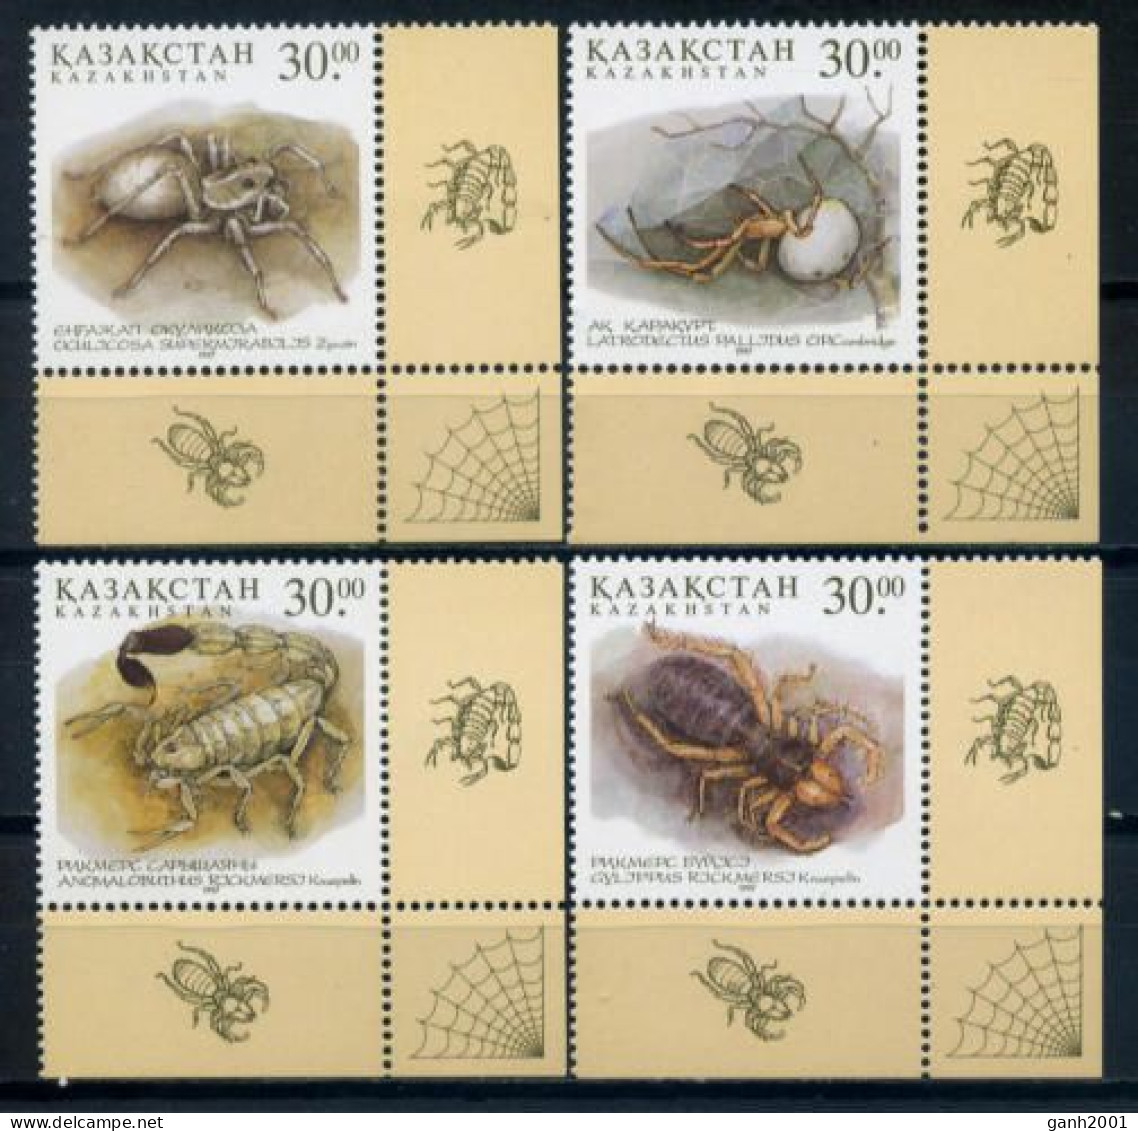 Kazakhstan 1997 / Insects Spiders MNH Insectos Ara&ntilde;as Spinnen / Hi99  2-13 - Araignées